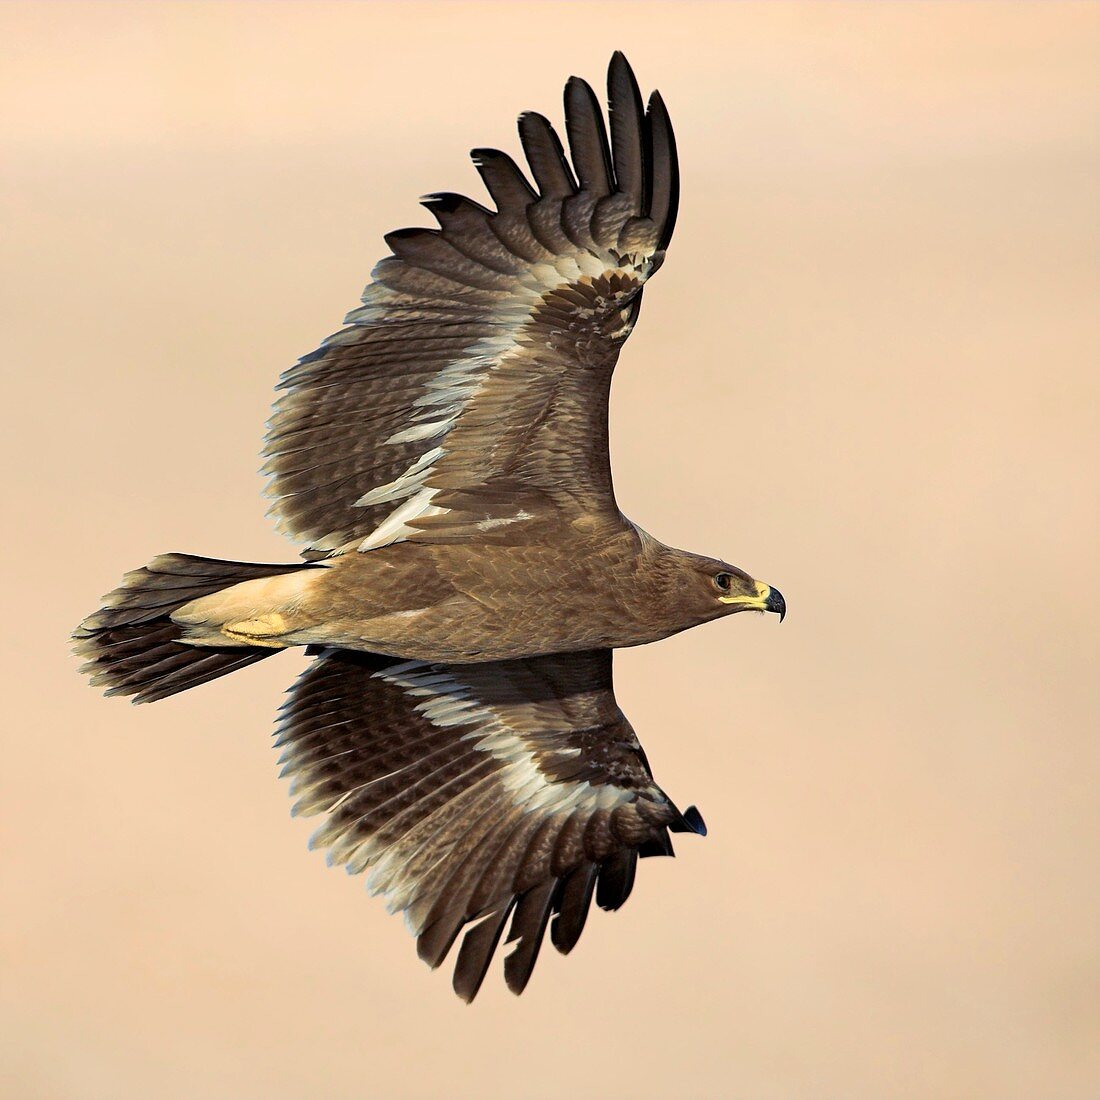 Steppe eagle in flight